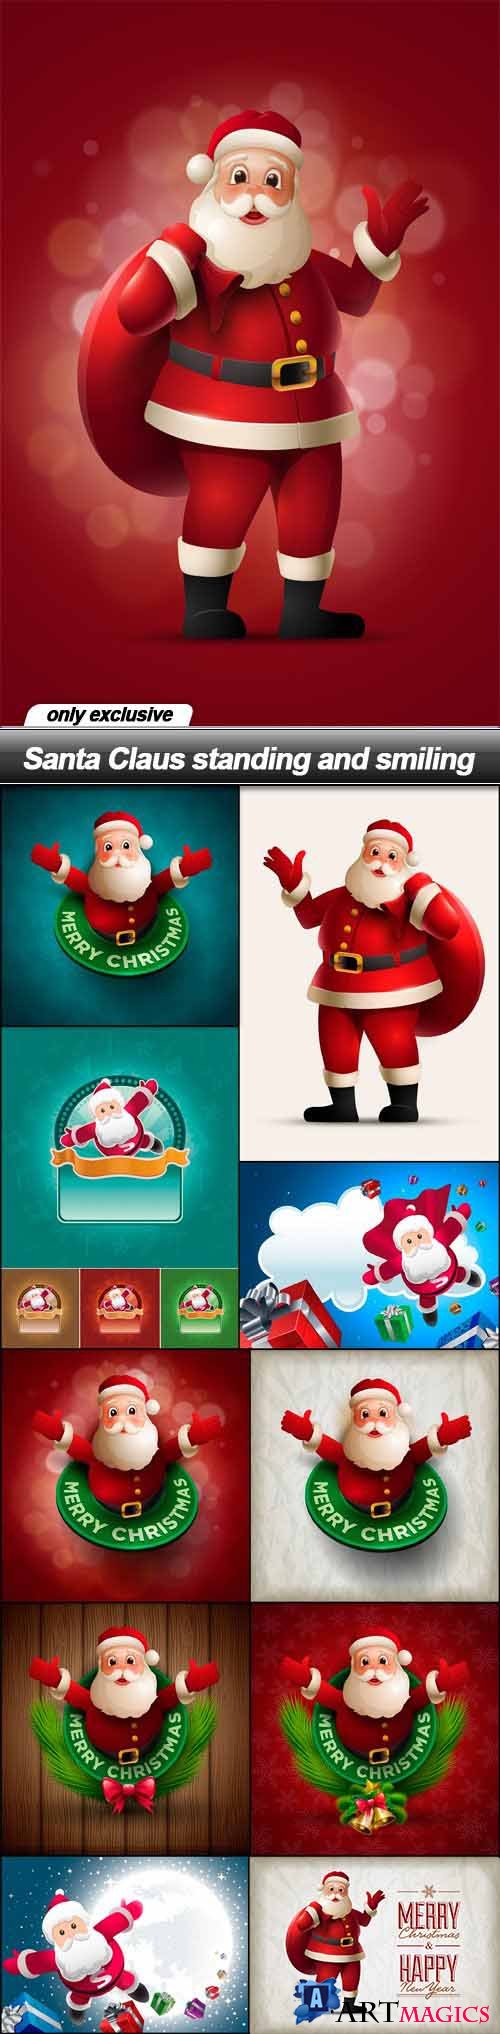 Santa Claus standing and smiling - 11 EPS